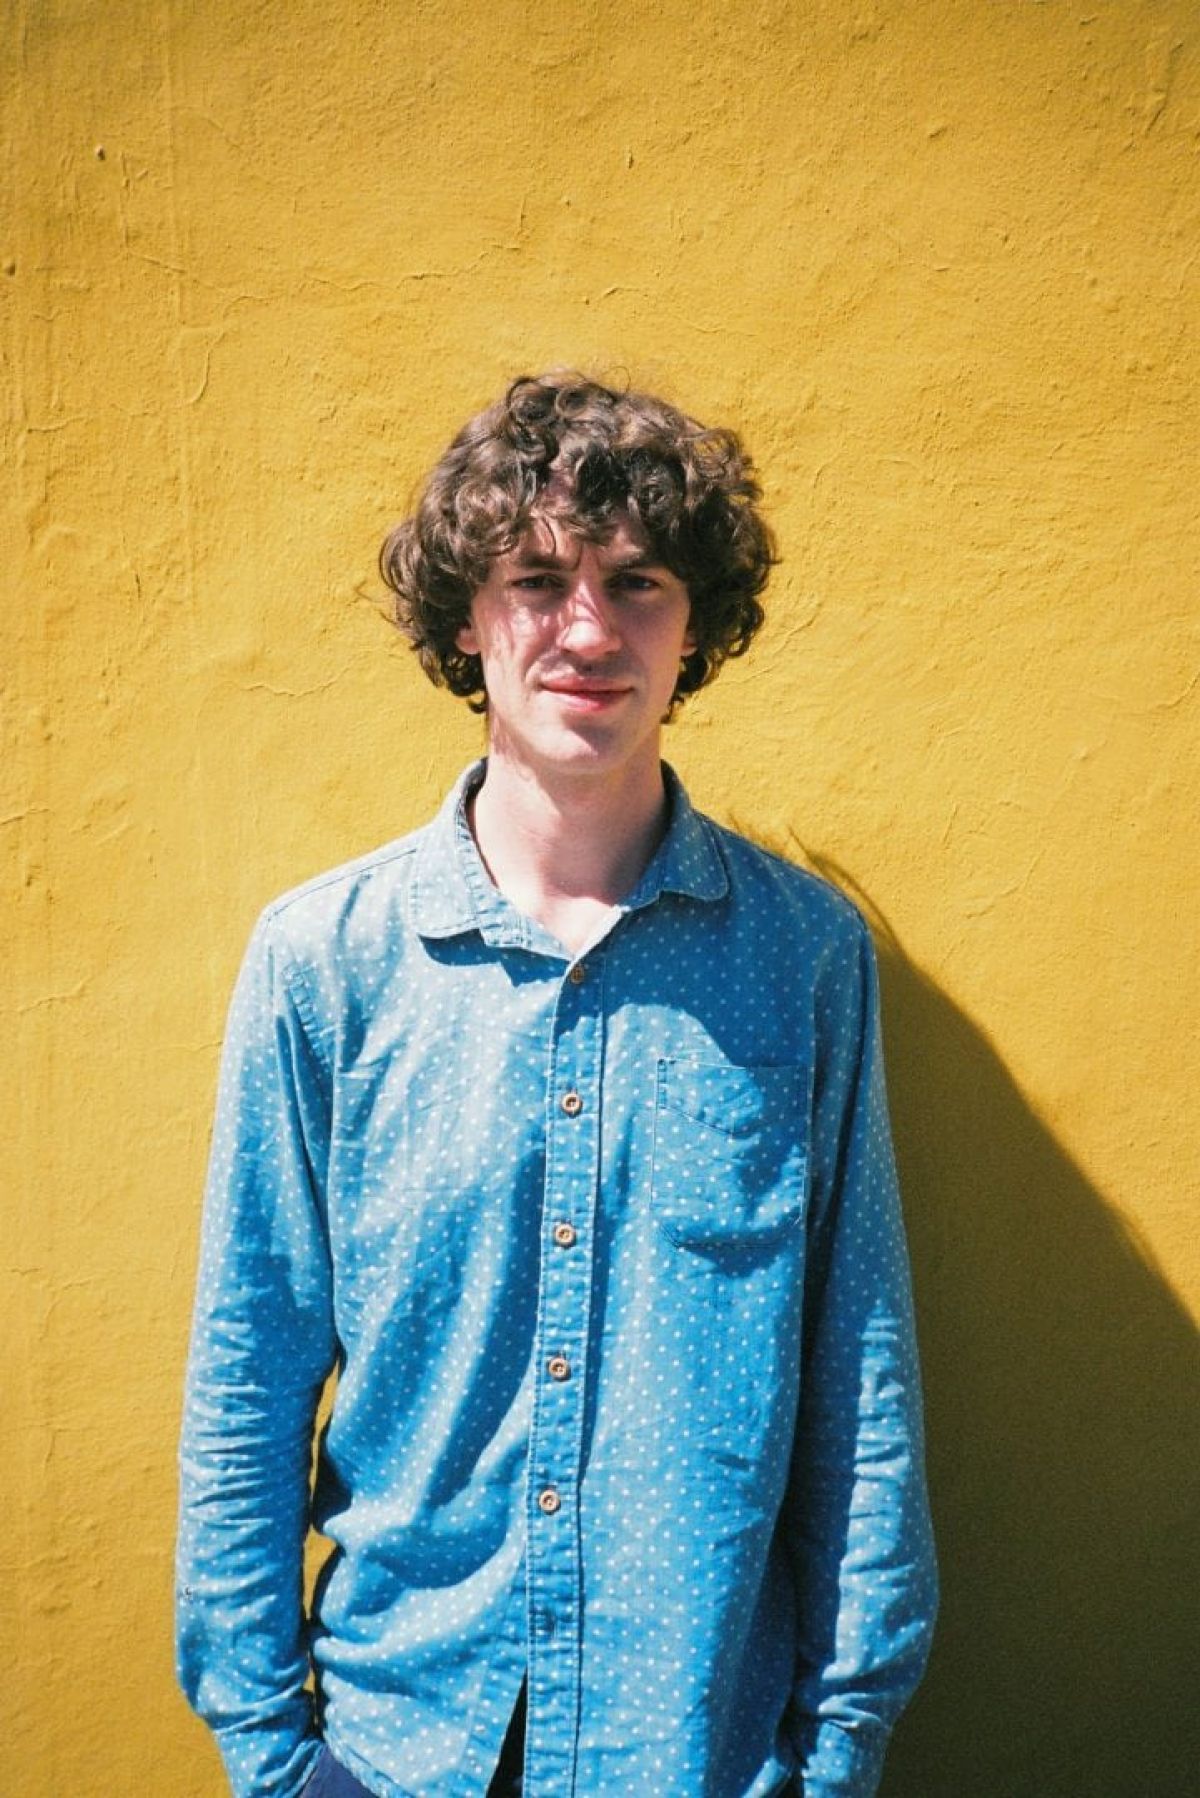 Cosmo Sheldrake announces debut album ‘The Much Much How How and I’